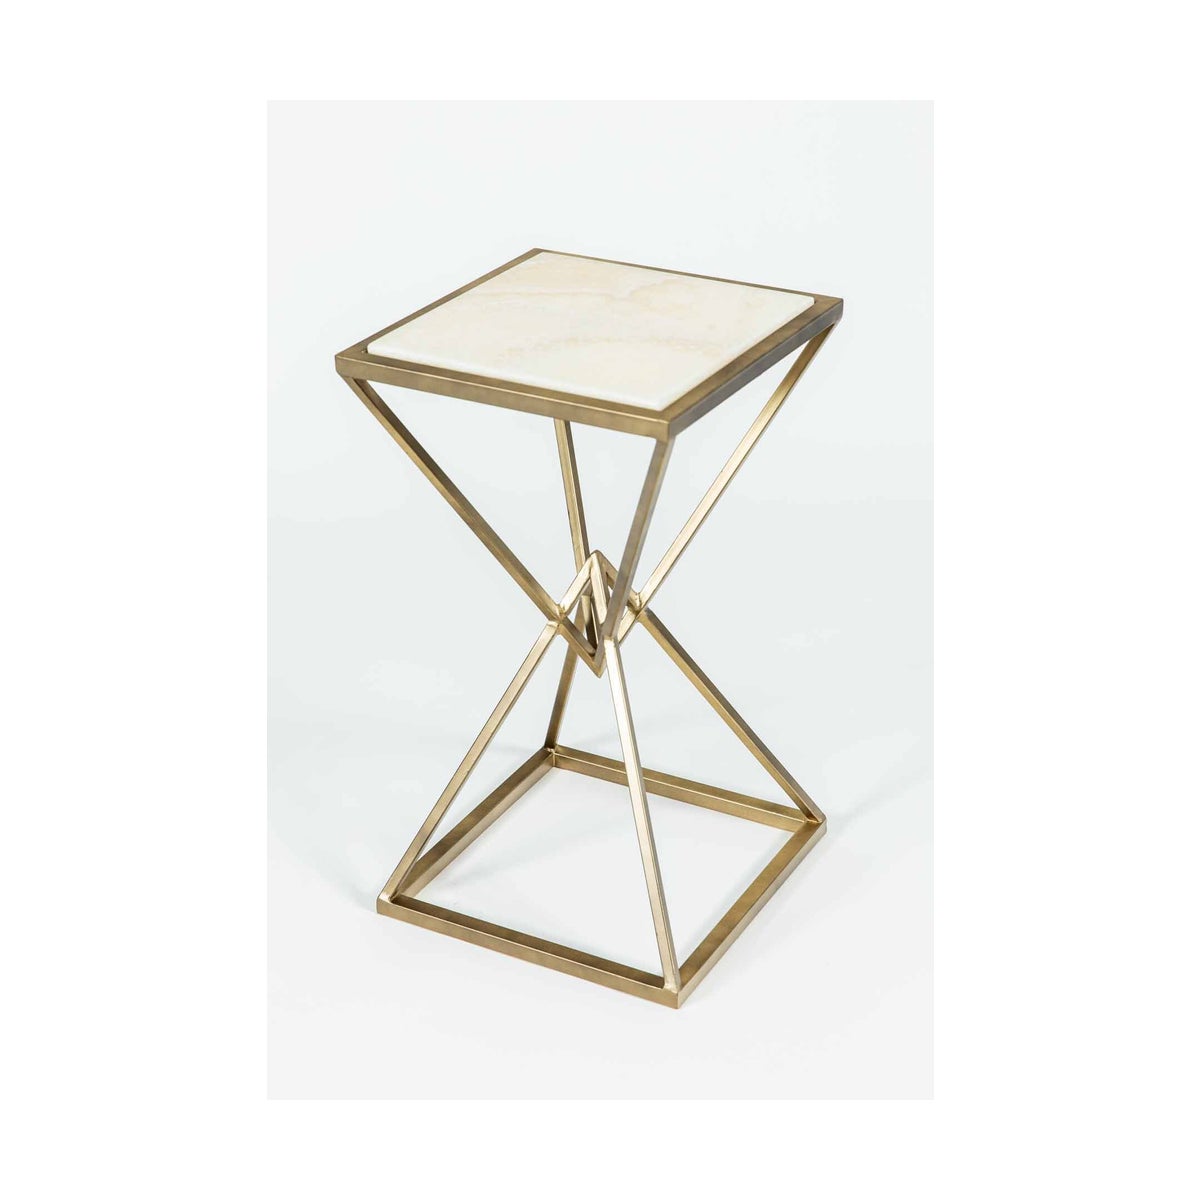 Malcolm Accent Table in Antique Brass with Cream Onyx